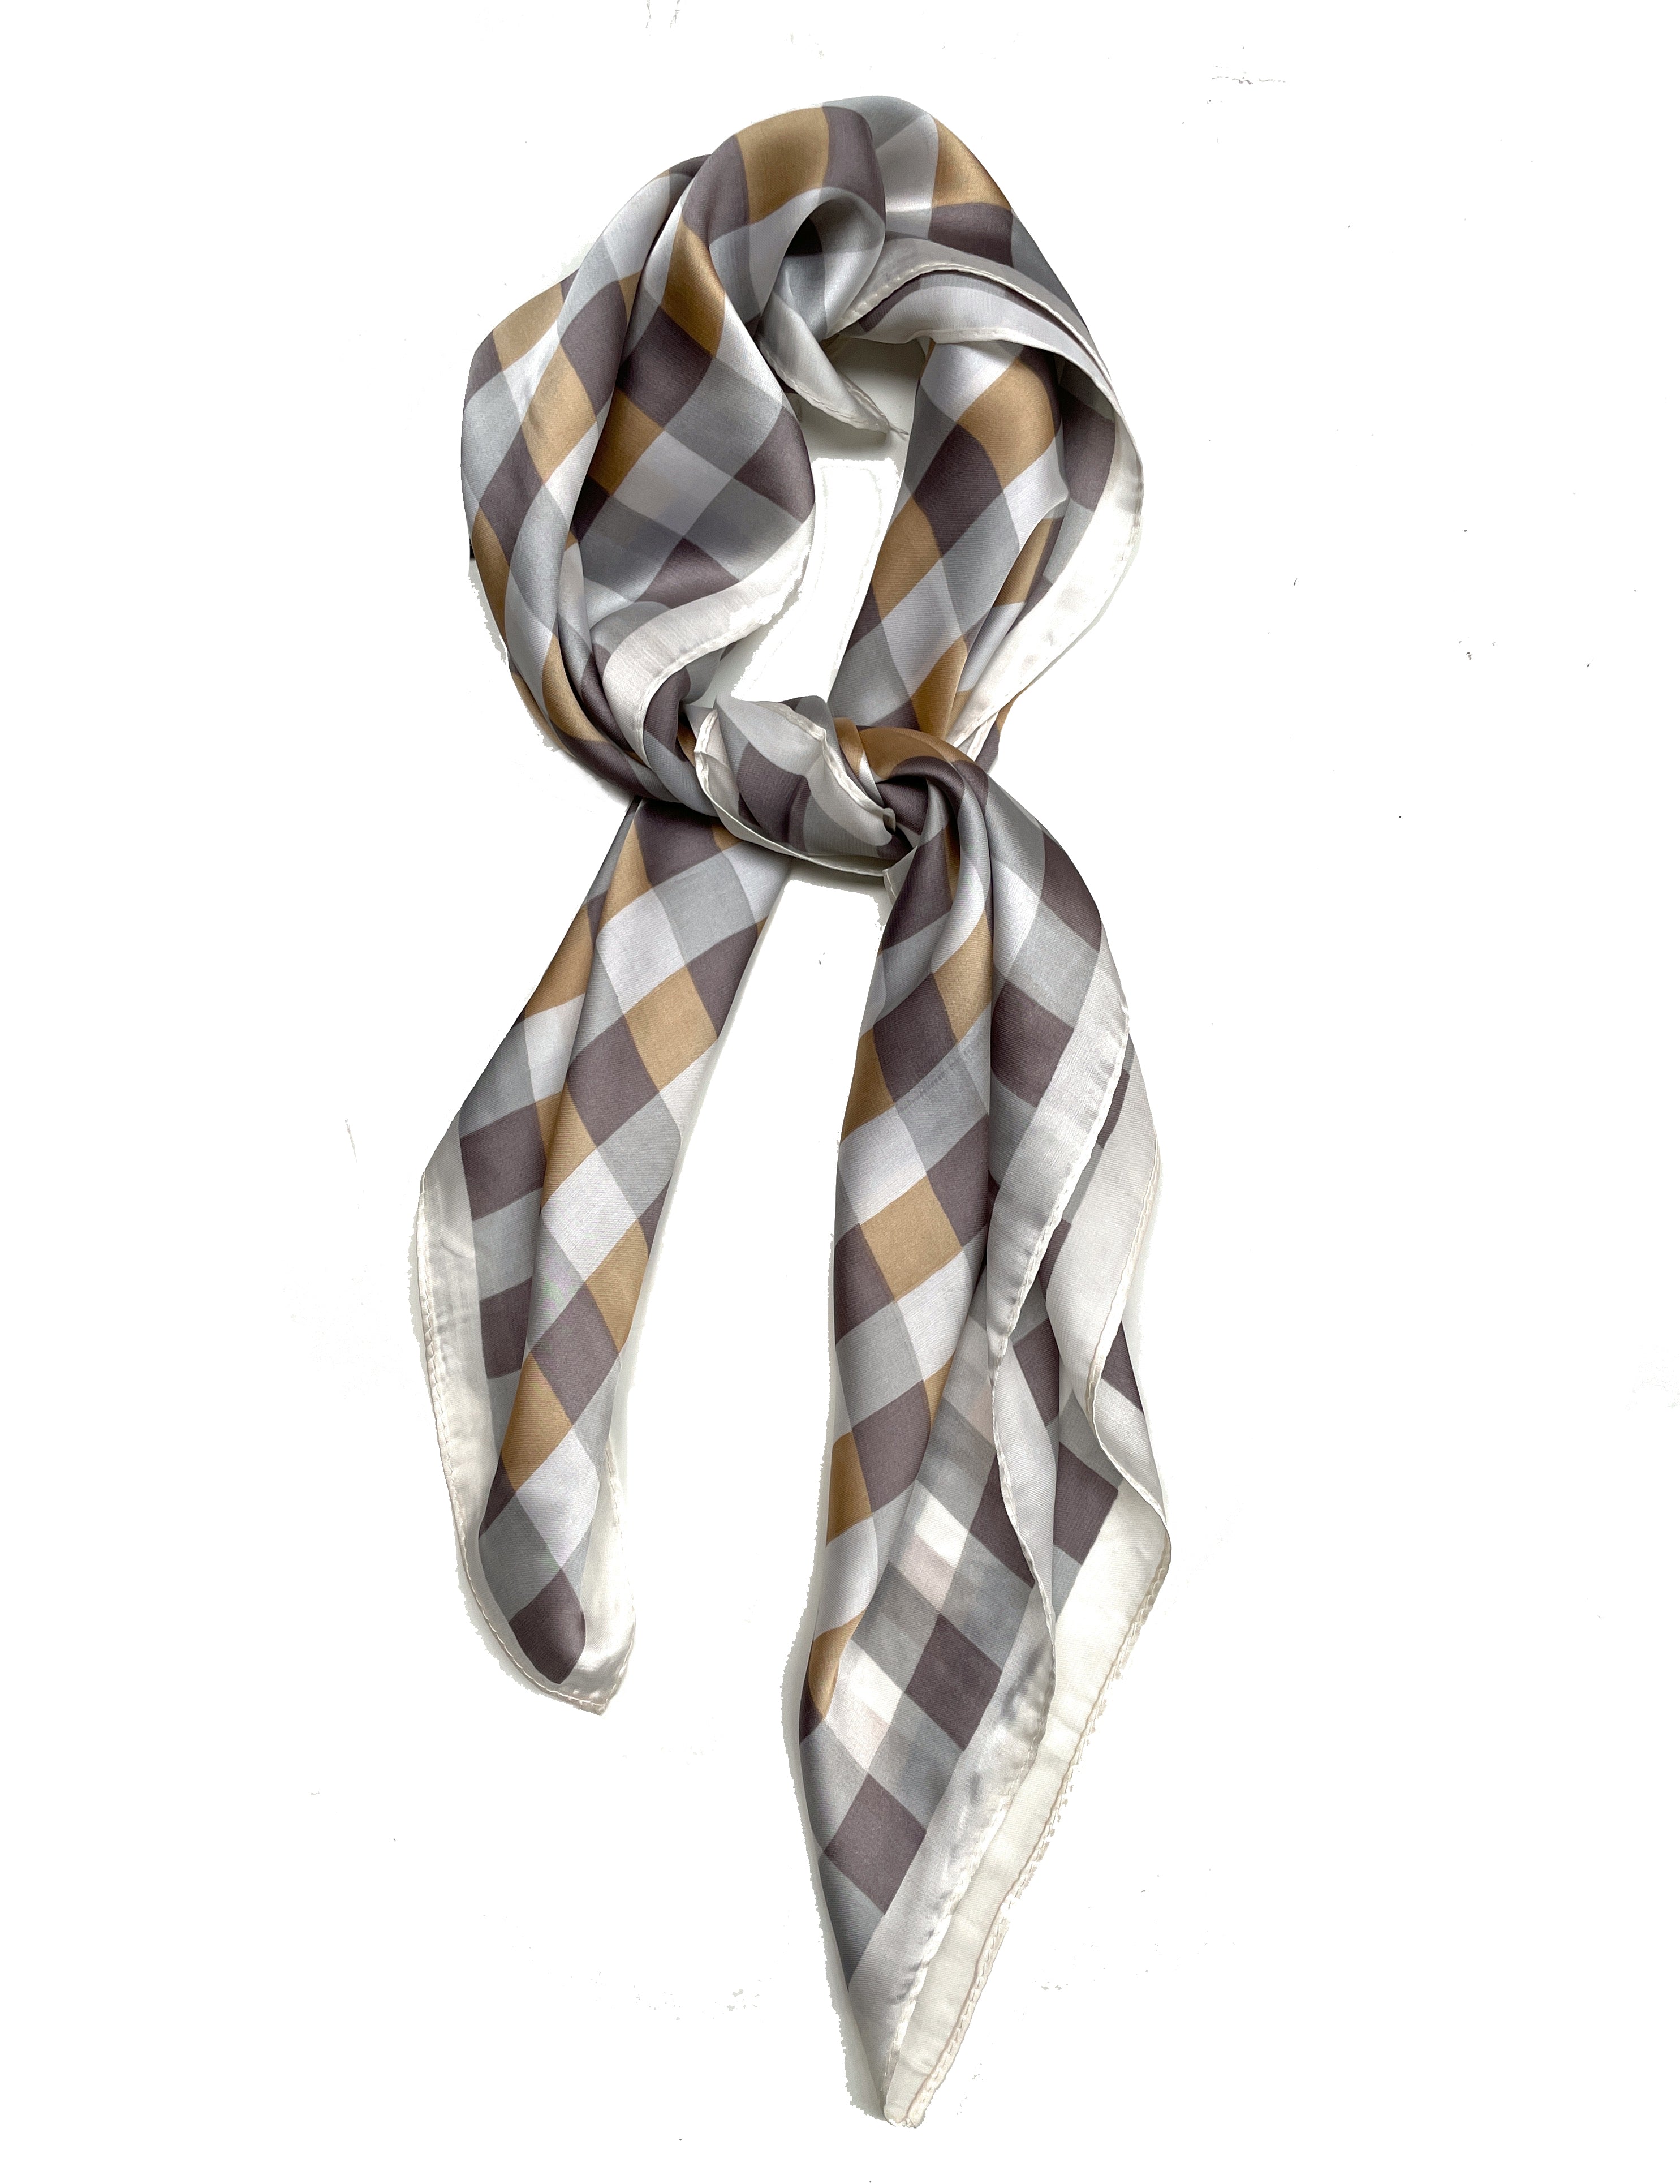 70cm x 70cm Square Scarf Beige Brown Checkered Print Pattern Scarf Thin Silky Womens Summer Spring